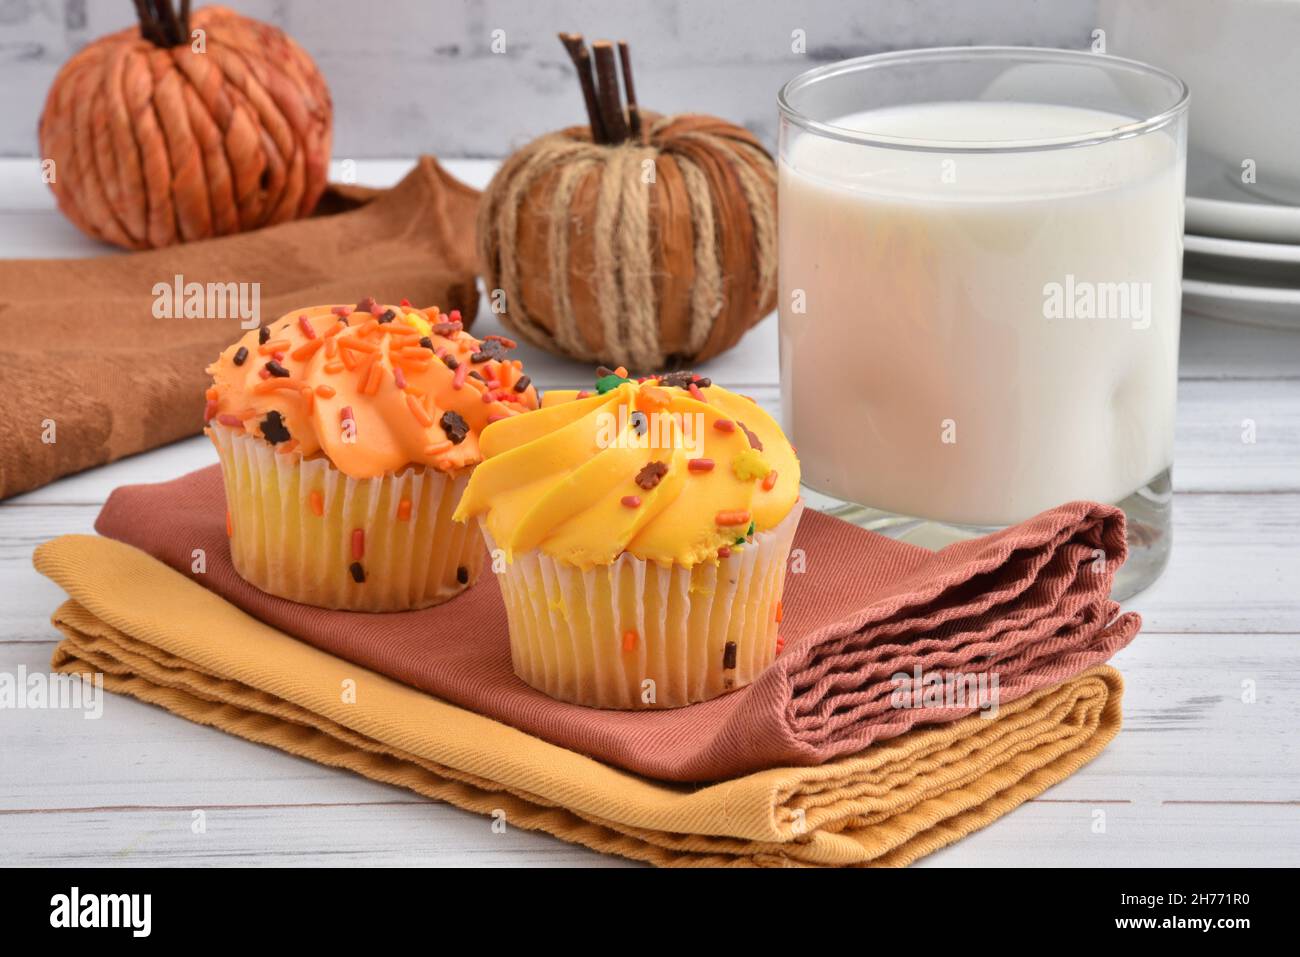 Gourmet Halloween or holiday cupcakes with a glass of milk on a rustic wooden table Stock Photo